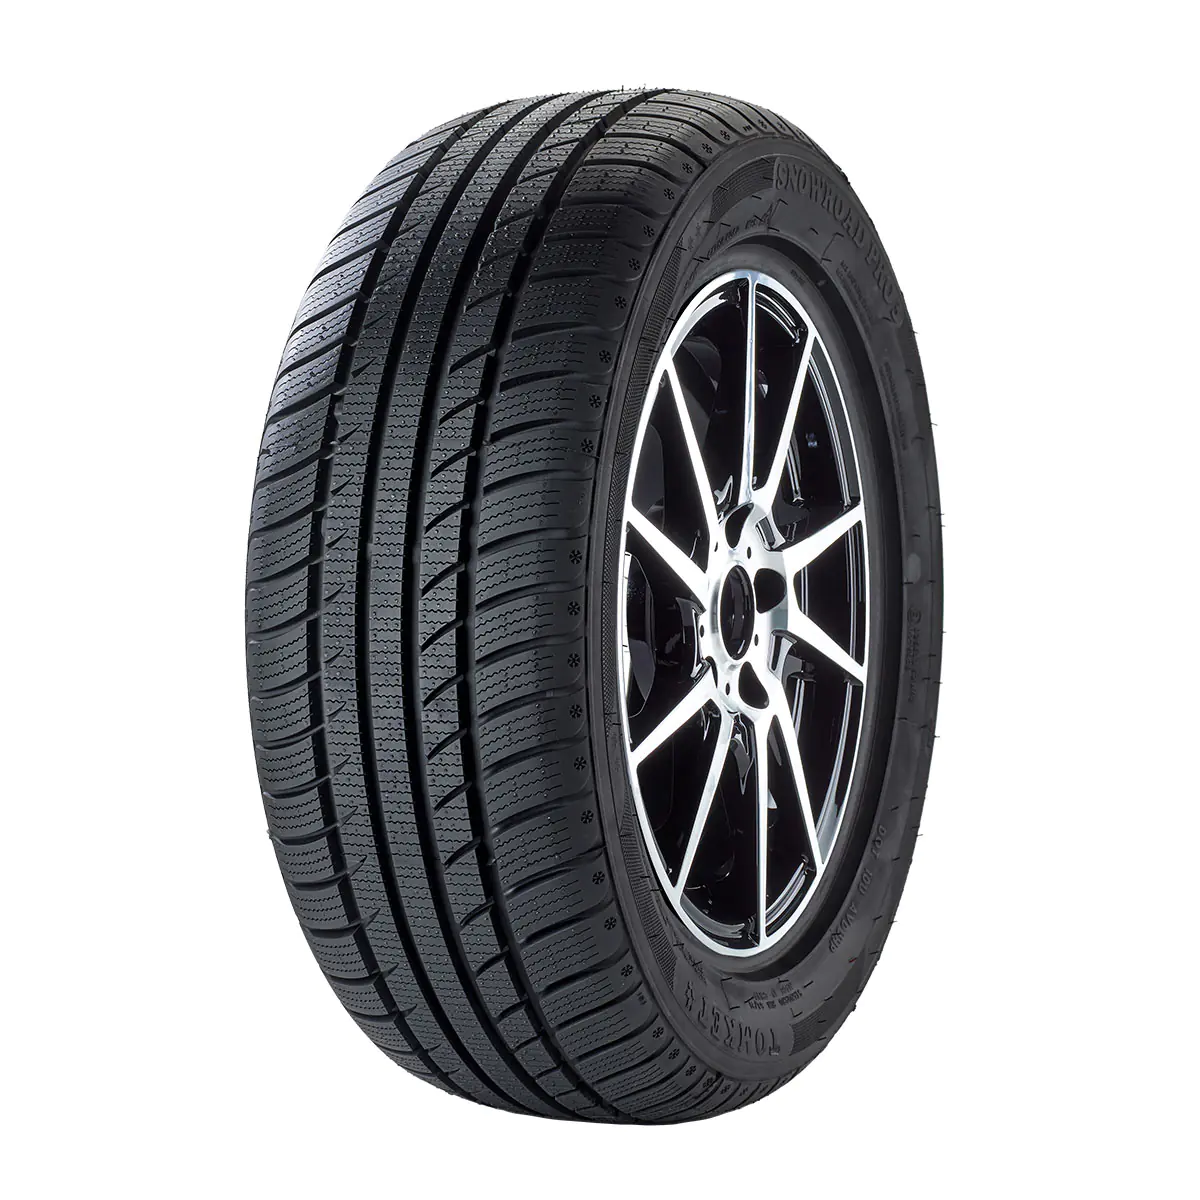 Chao Yang Chao Yang 165/70 R13 79T SW608 pneumatici nuovi Invernale 